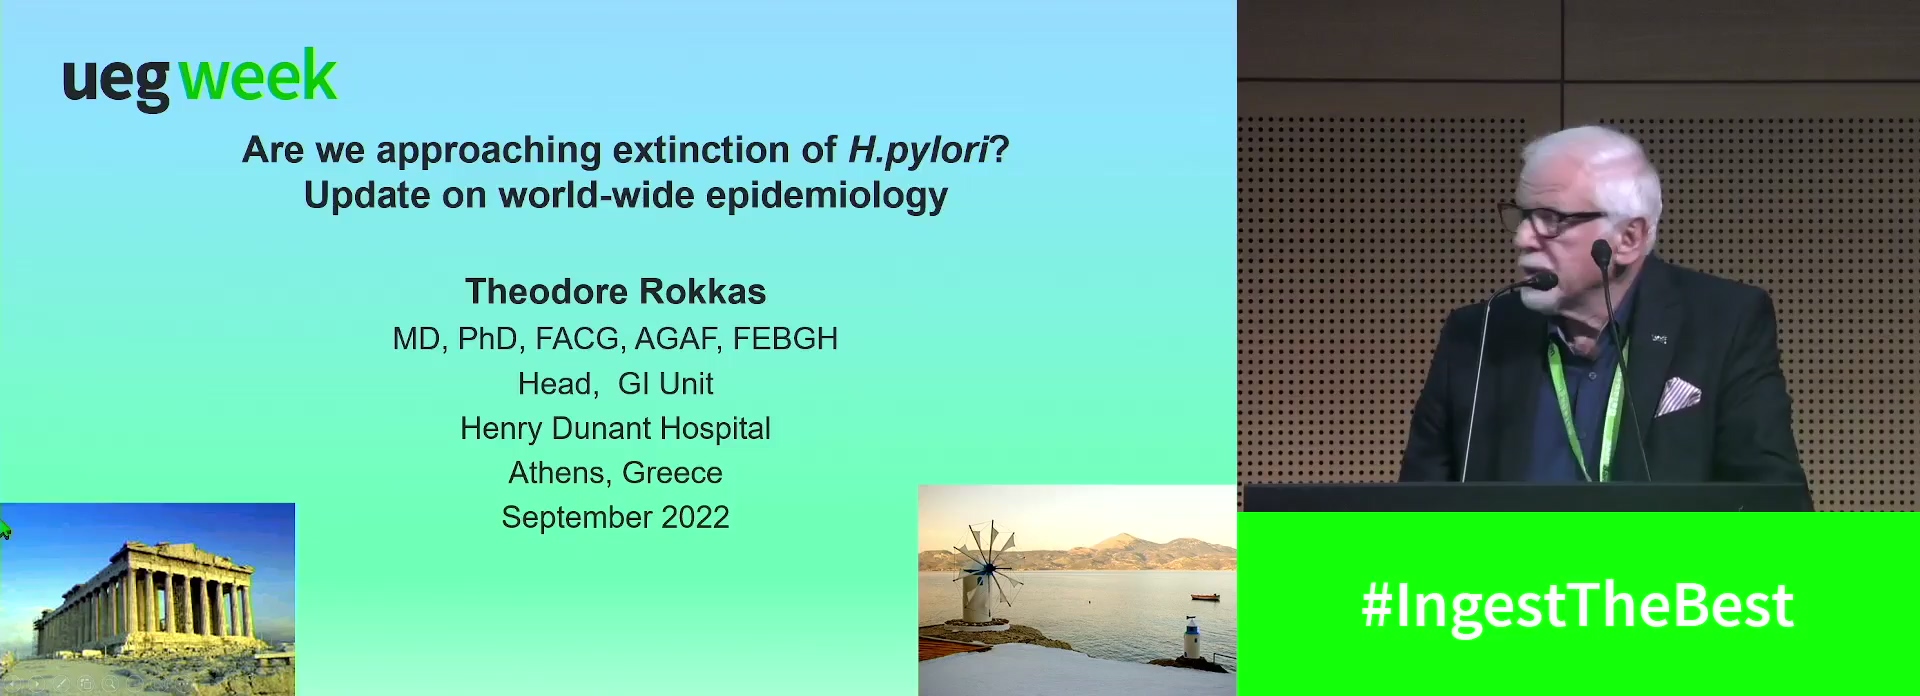 Are we approaching extinction of H.pylori? Update on world-wide epidemiology